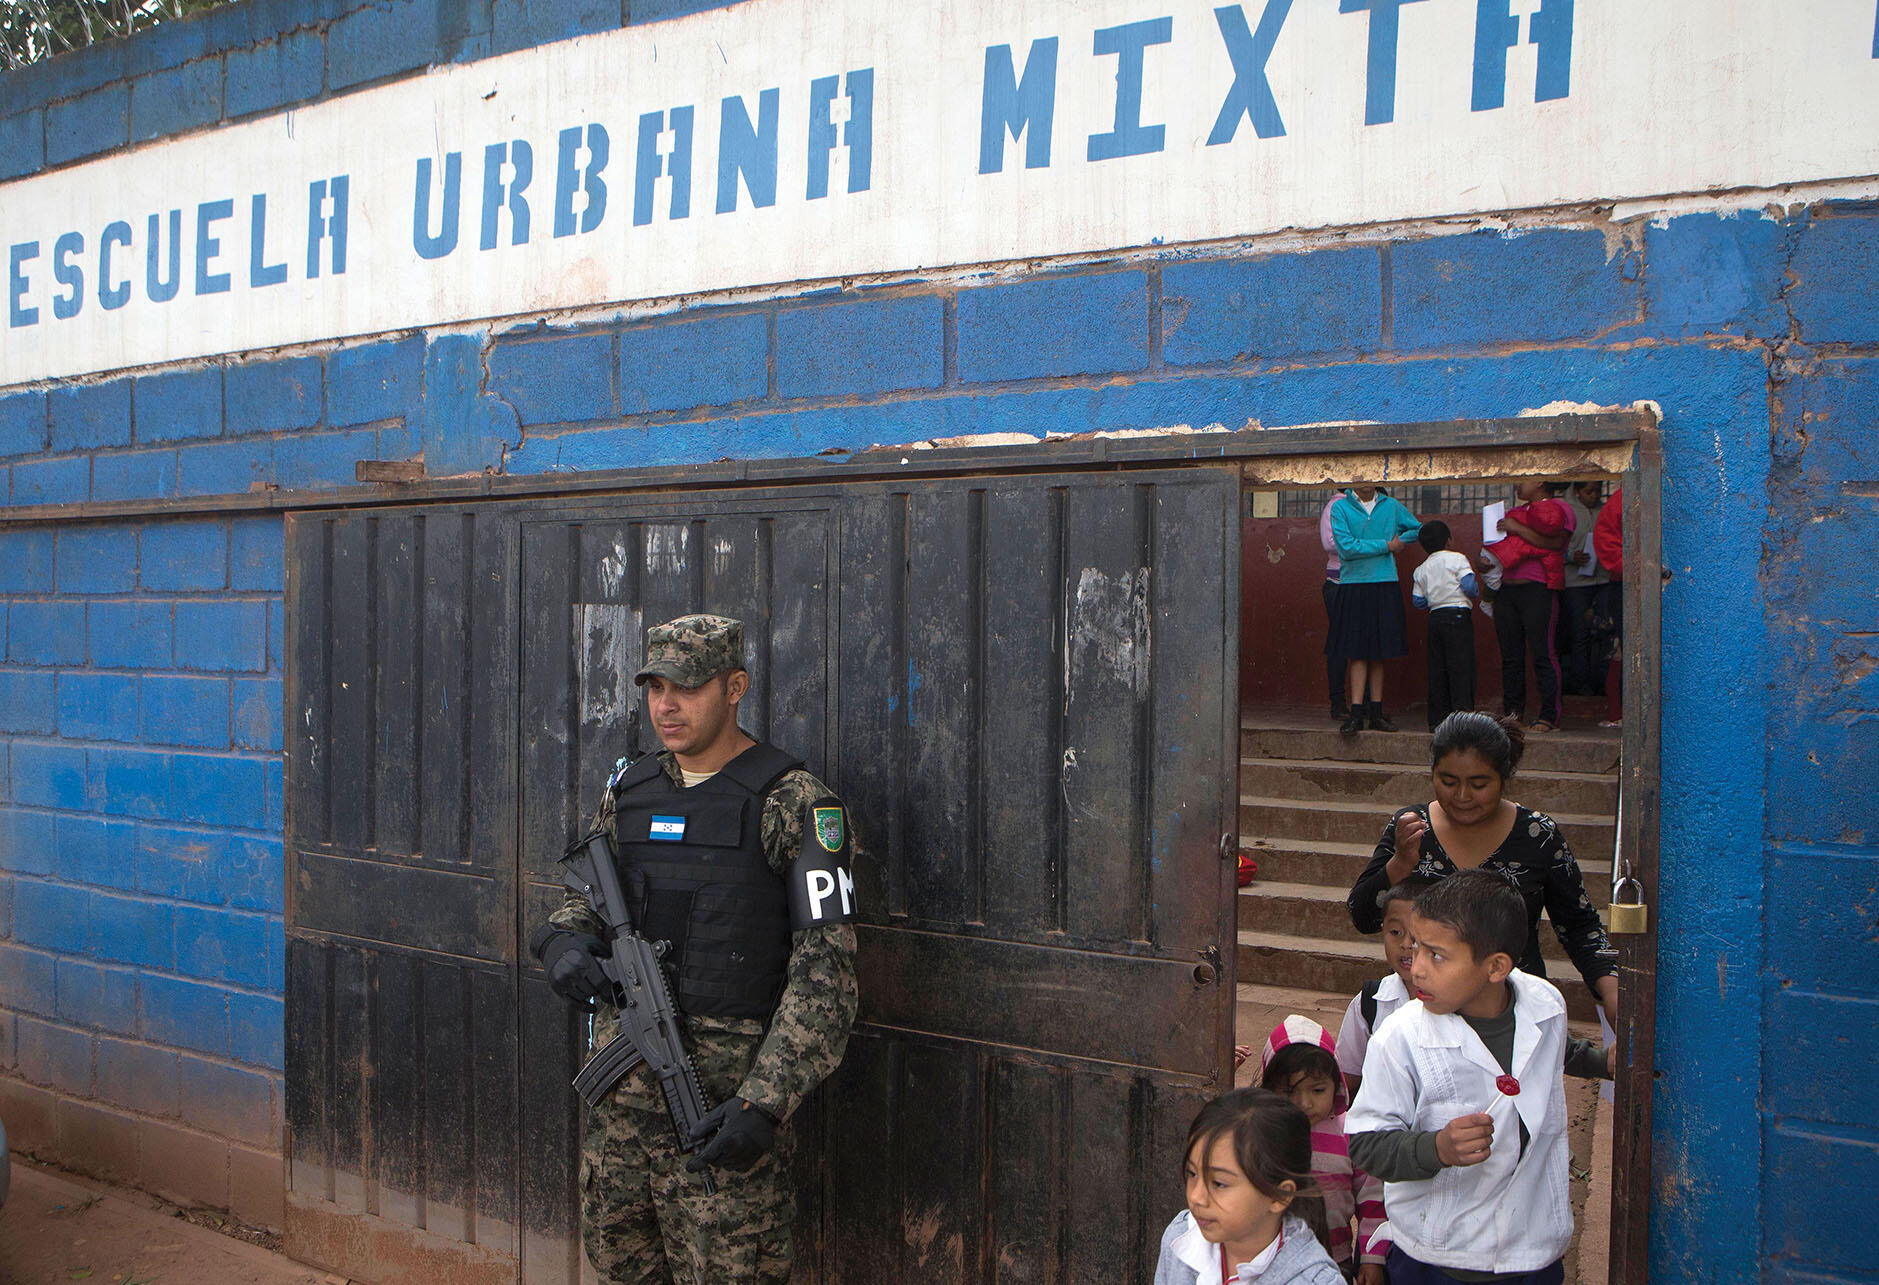 A member of the Honduran Military Police stands guard at the entrance of a school. (Photo by Esteban Félix/AP Photo.)